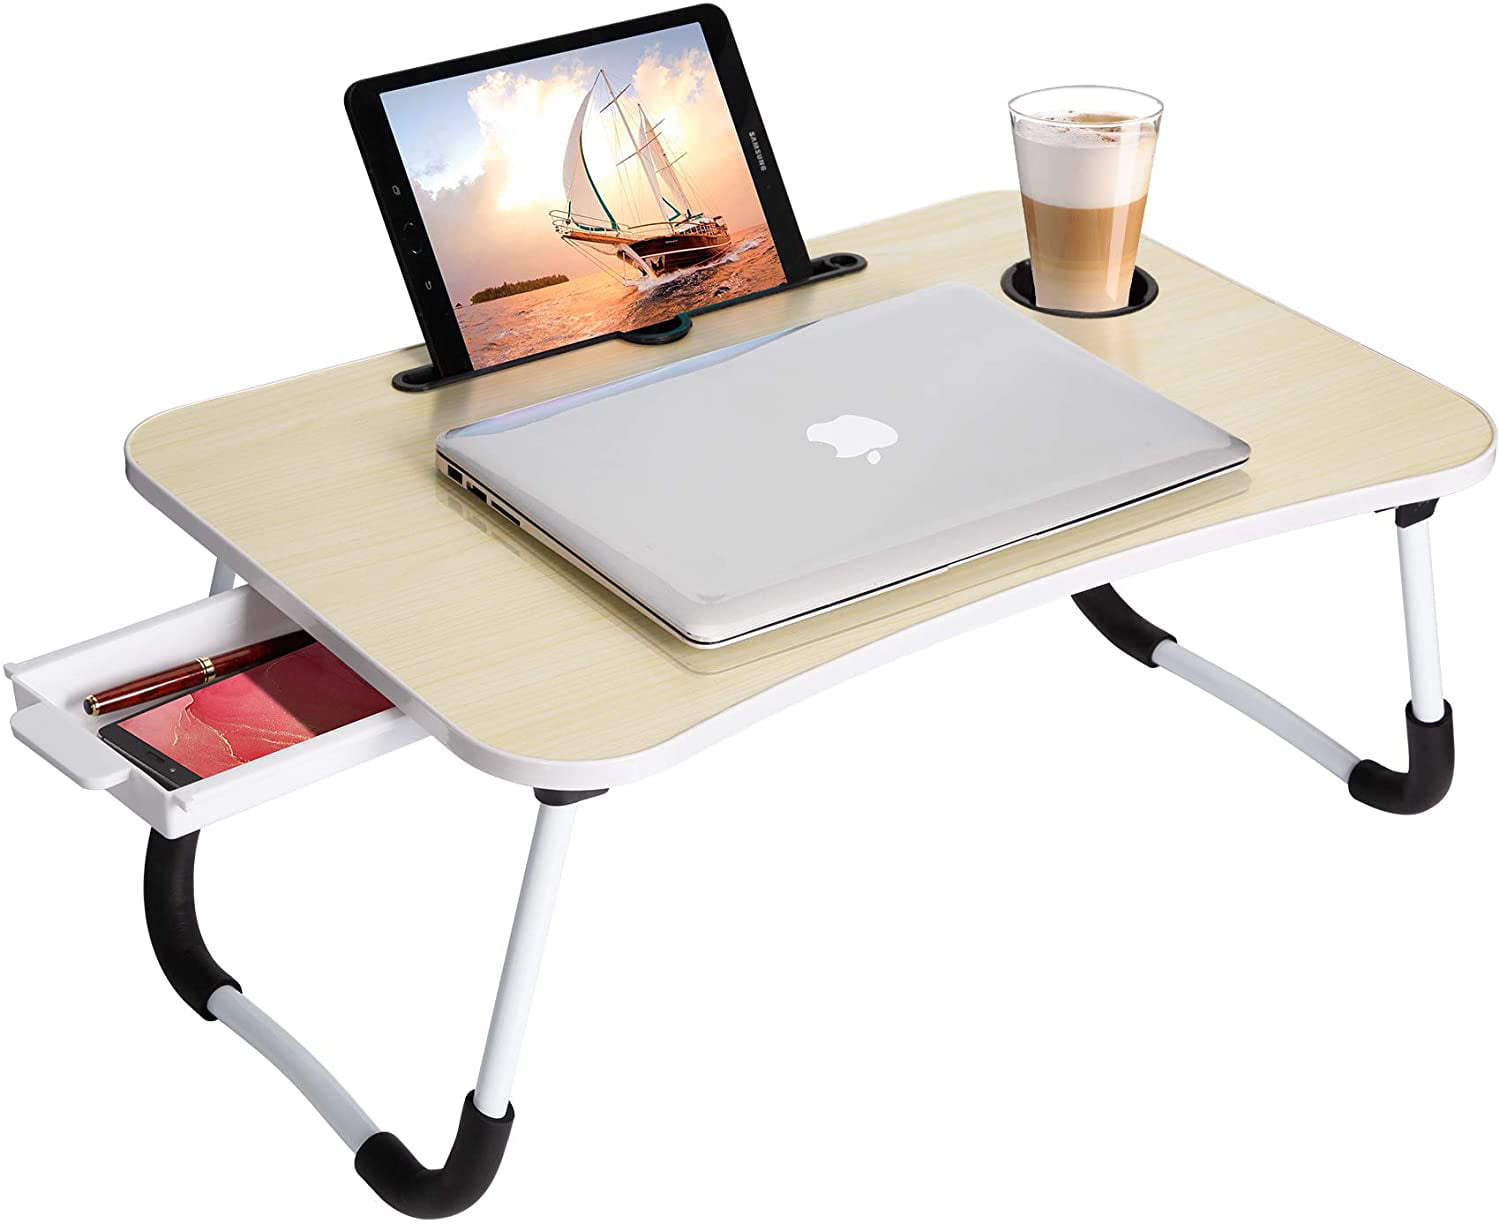 Pink 60 x 40cm Laptop Bed Table,Notebook Table Dorm Desk,Portable Lap Desk,Notebook Table Dorm Desk with Foldable Legs & Cup Slot,for Eating Breakfast,Reading,Watching Movie on Bed/Sofa 